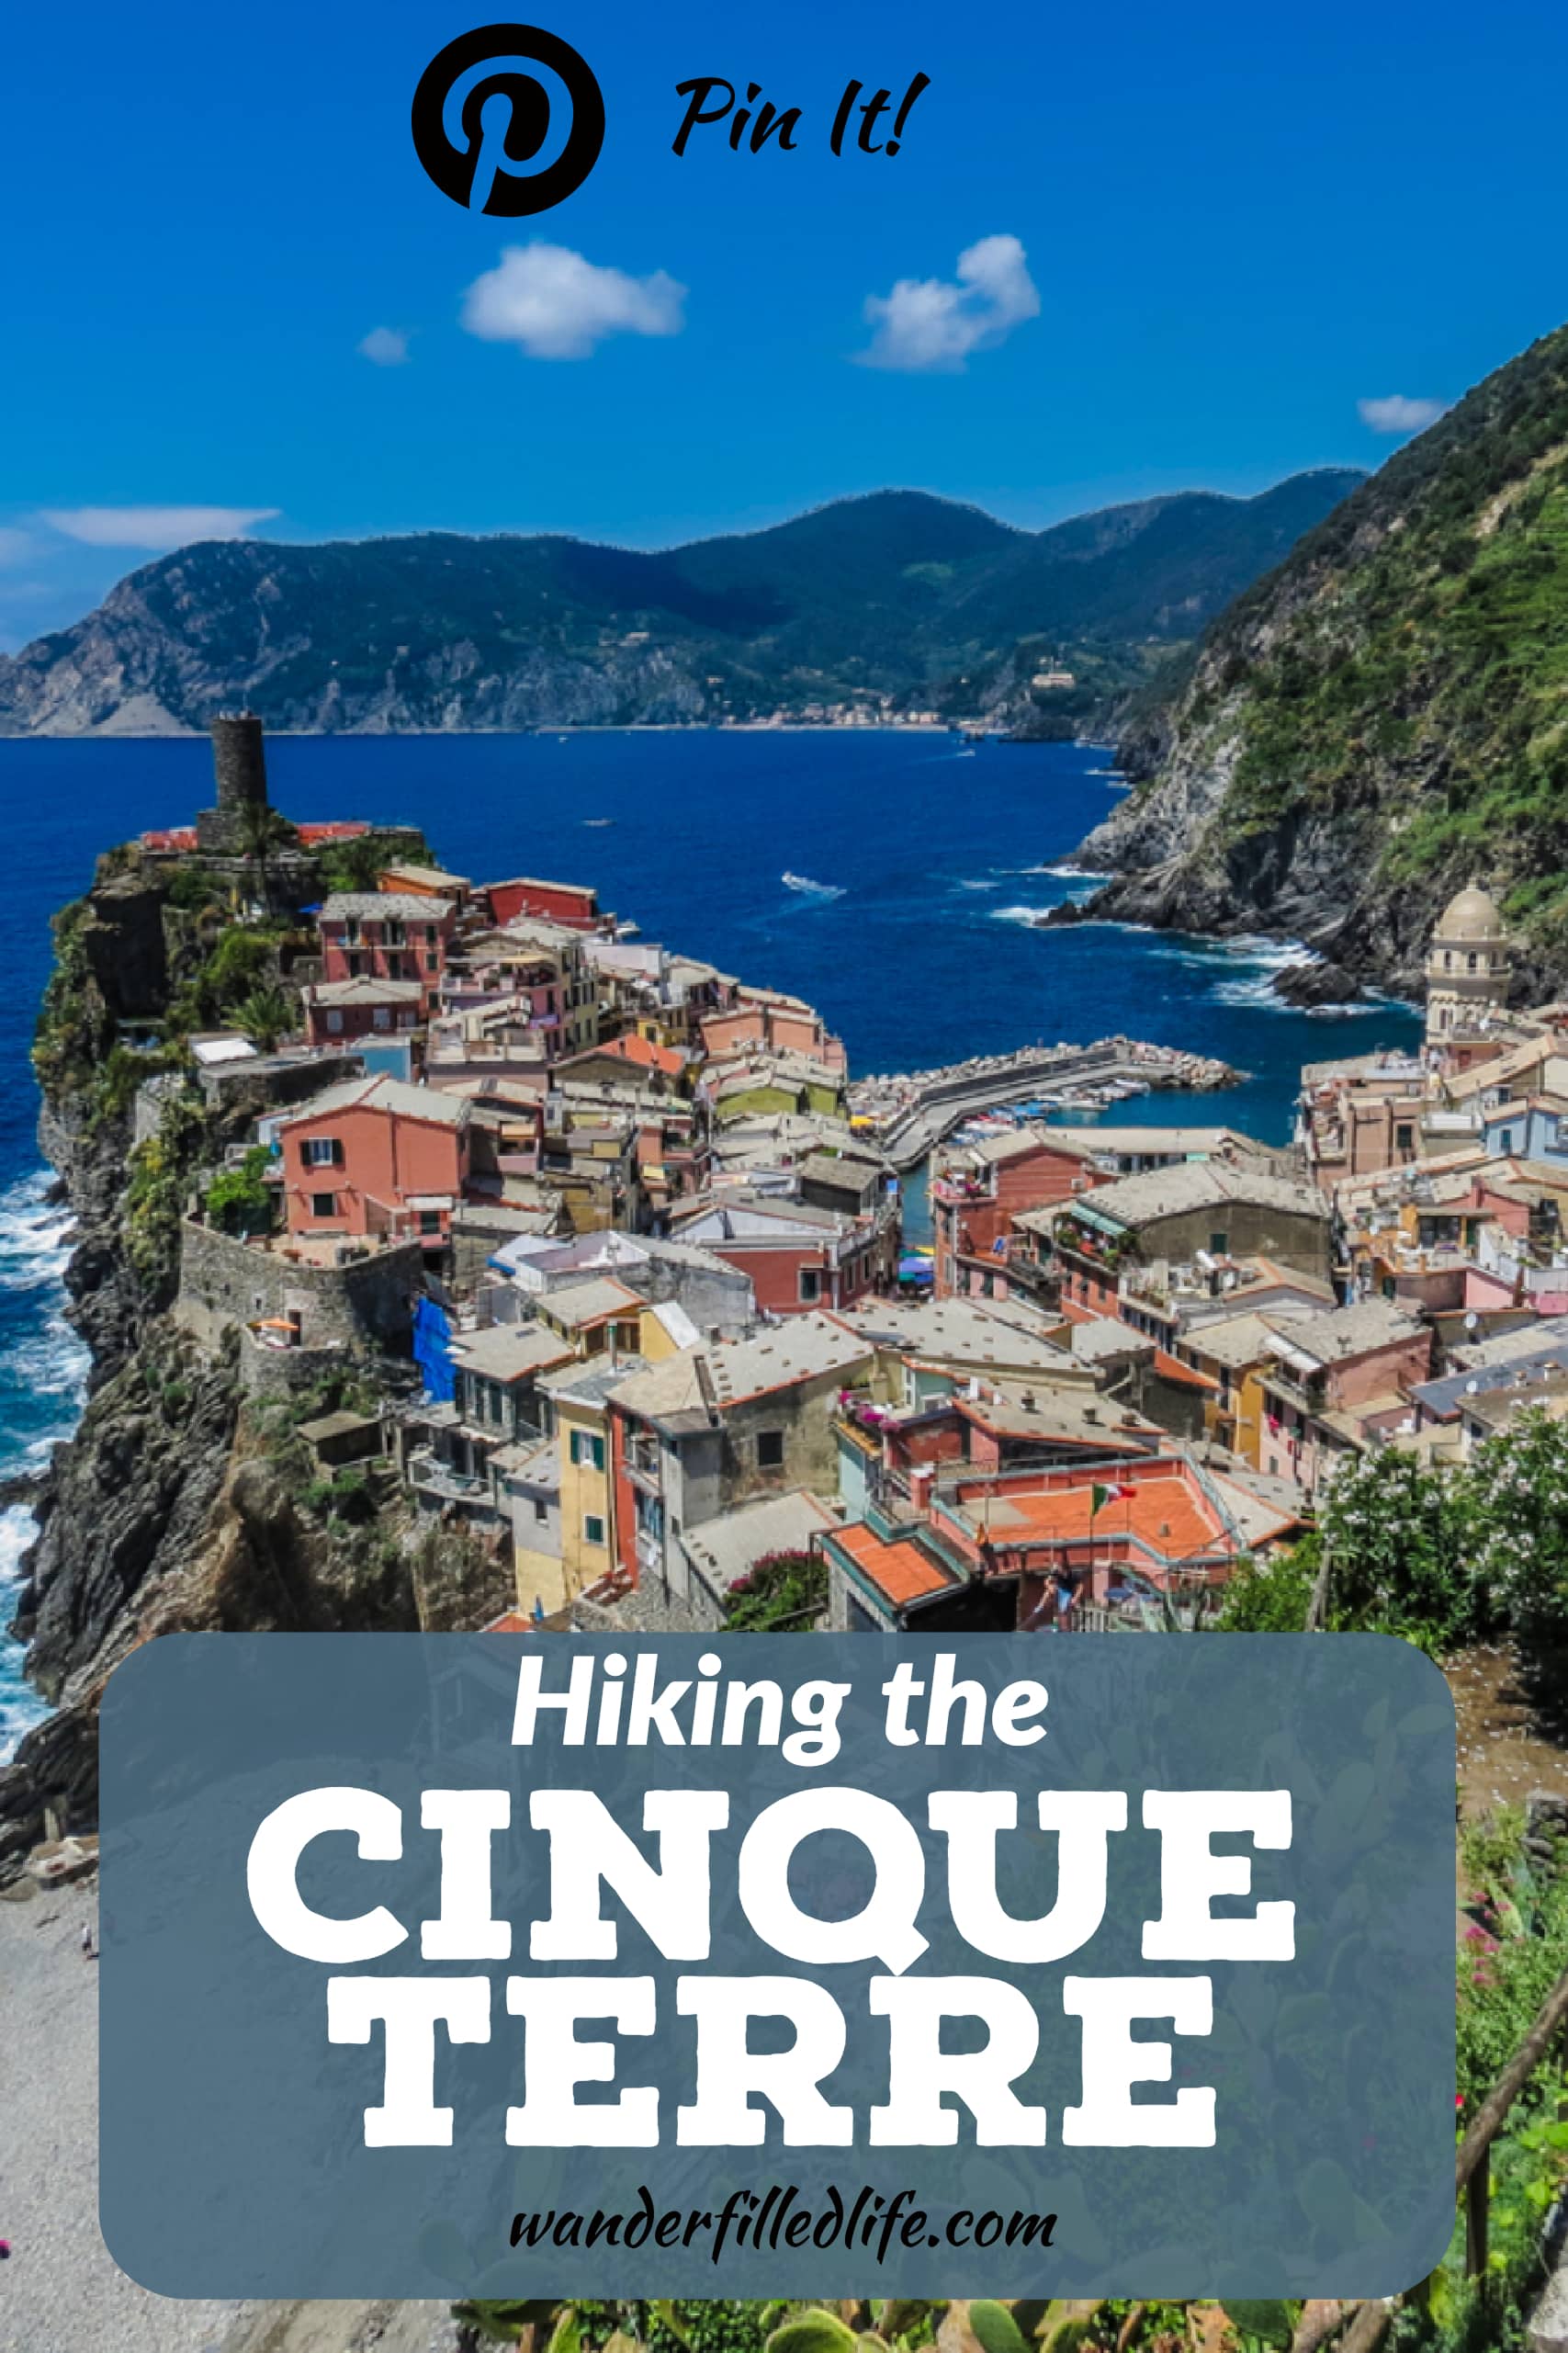 The Cinque Terre, both a National Park and a UNESCO World Heritage Site, is the Italian Riviera at its best. These five small towns, connected by a trail, may be filled with tourists, but it is still laid back and enjoyable. Hike the Sentiero Azurro for heart-pumping views and exercise.